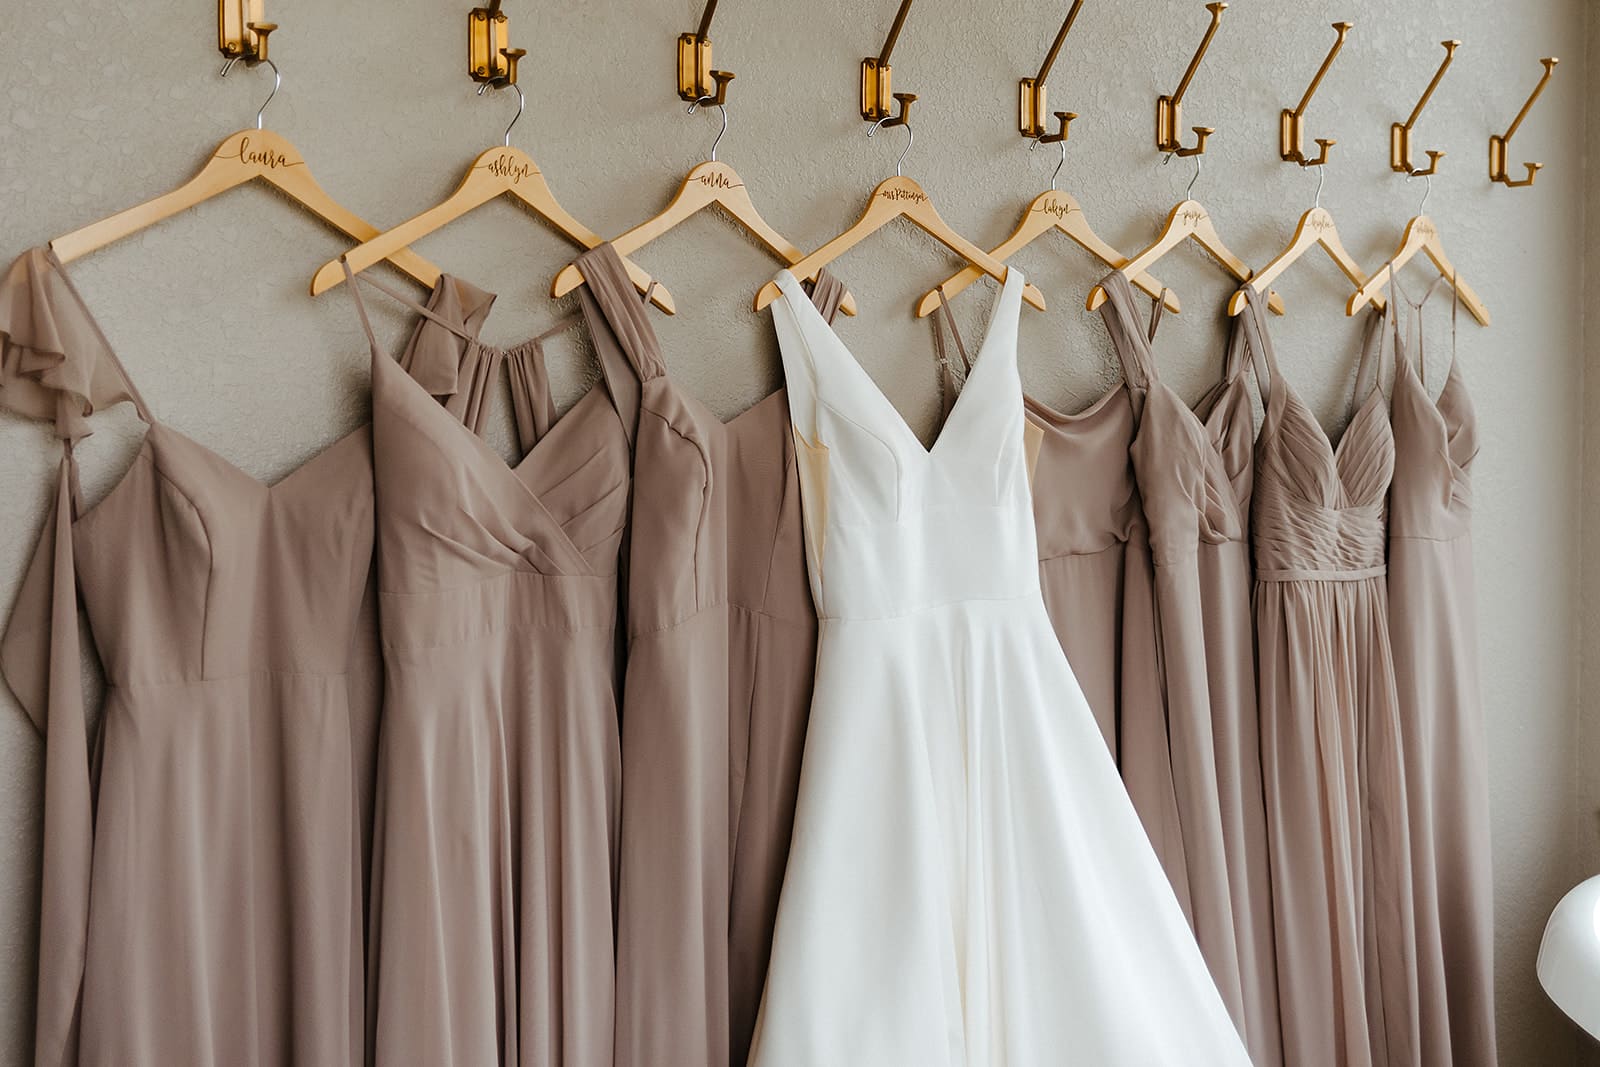 wedding gown and bridesmaids dresses hanging on hooks